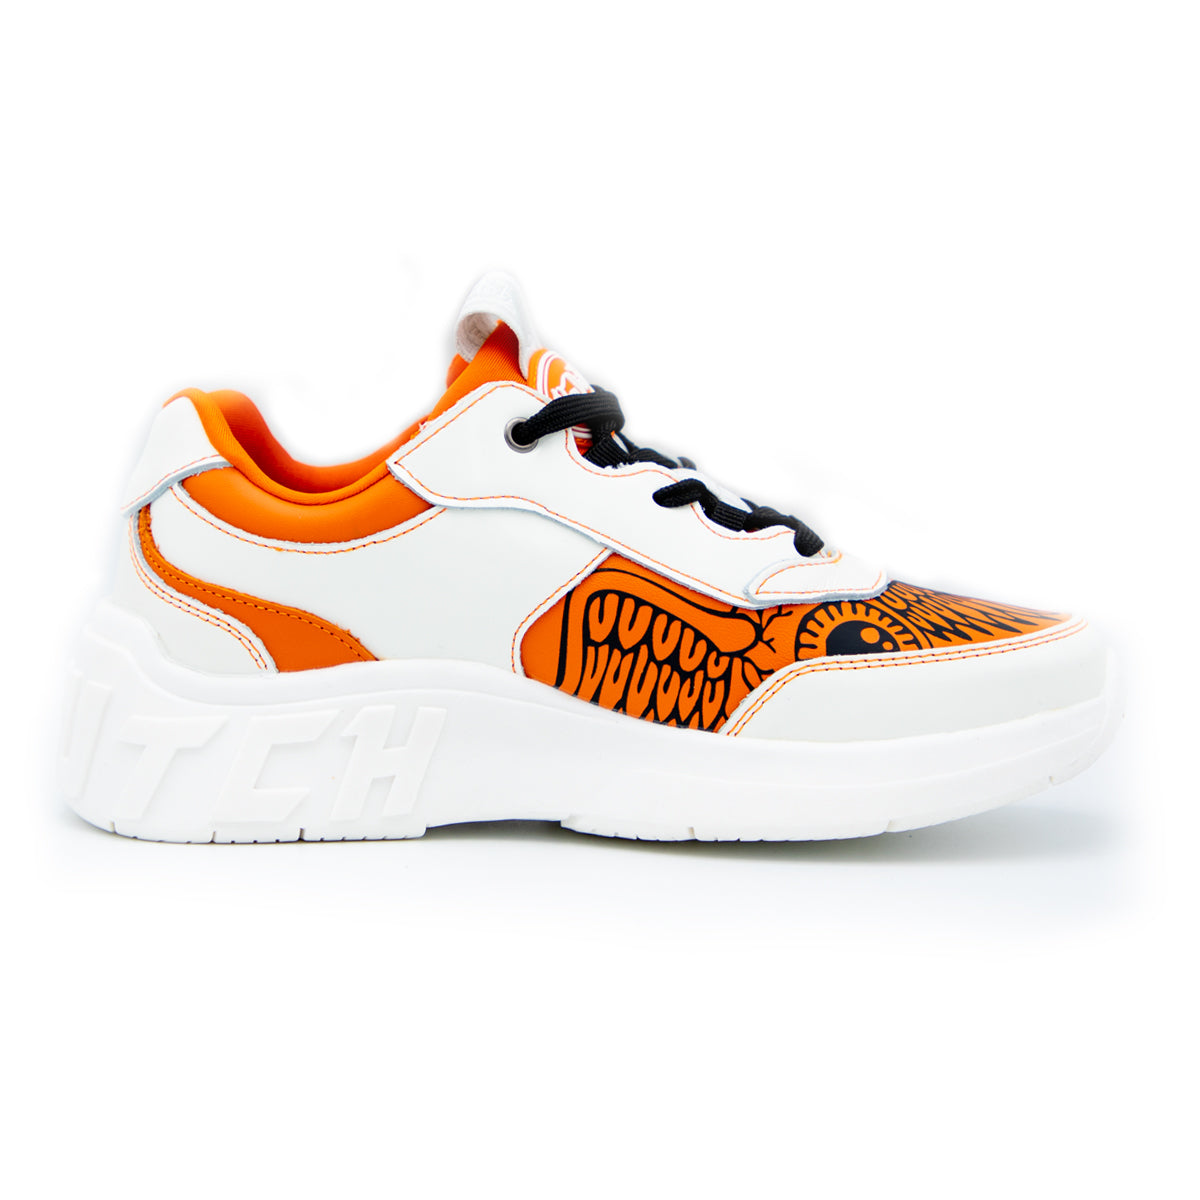 orange and white shoes